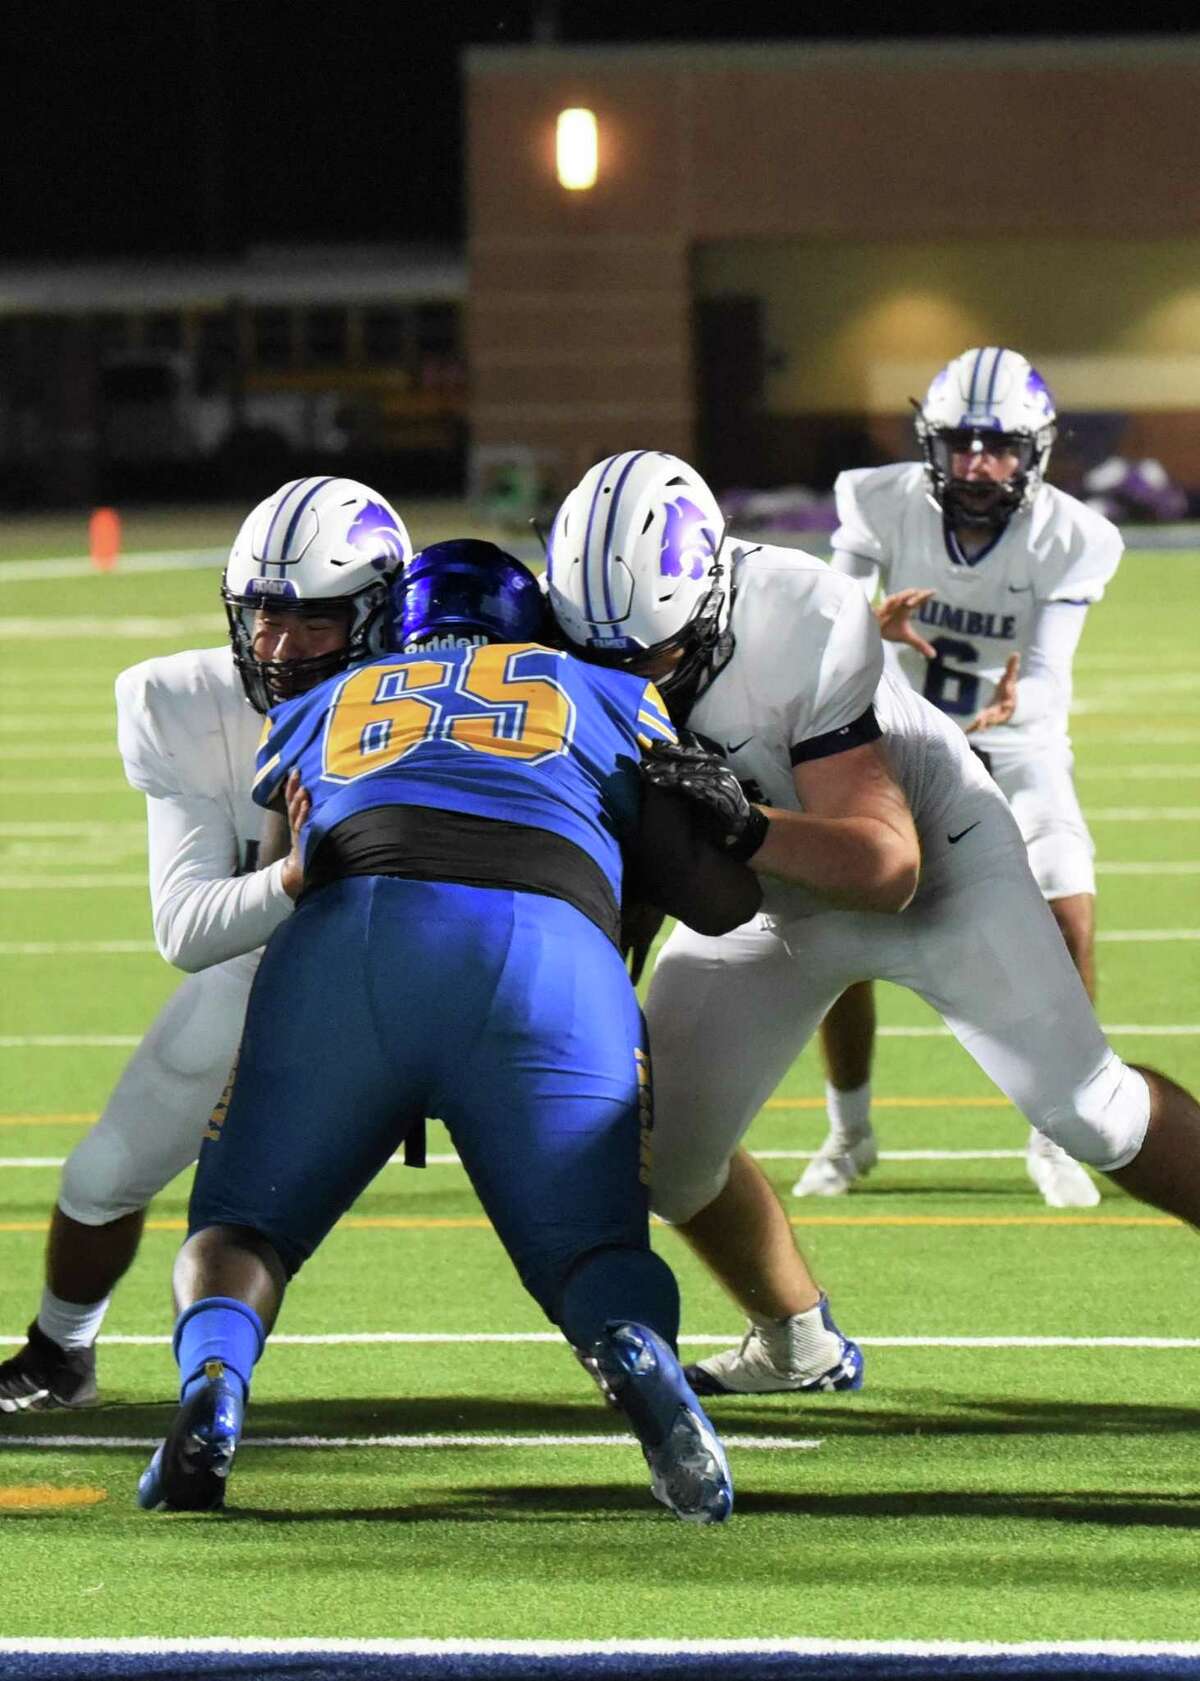 Sophmore Humble offensive lineman Ayden Alvarez played in his first varsity football game to open the 2021-2022 season